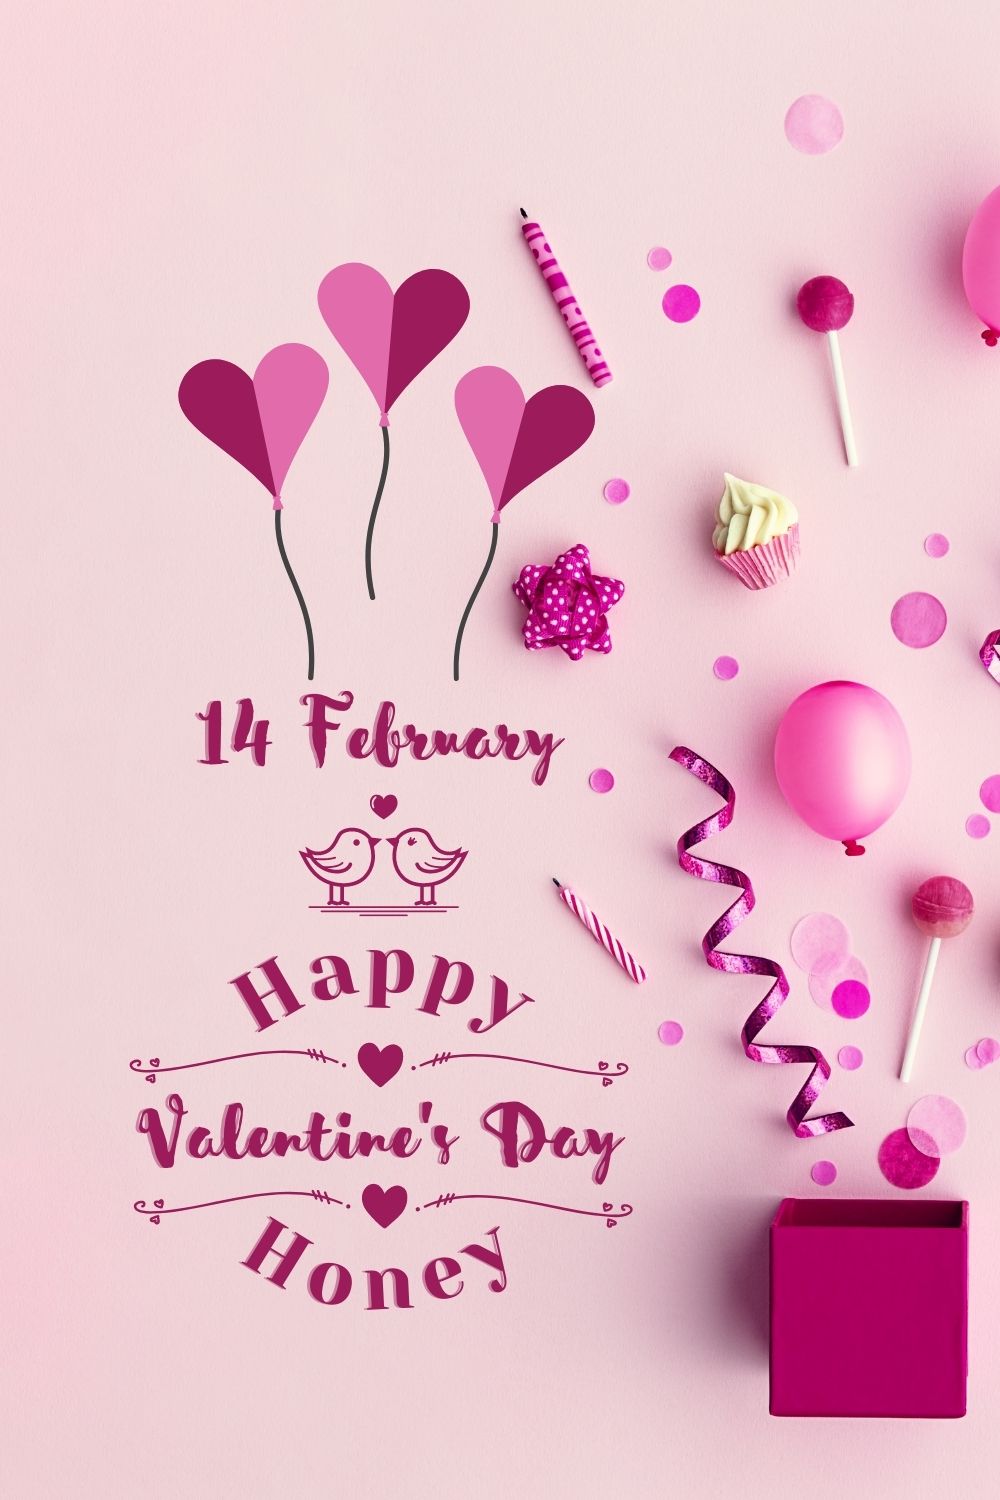 valentines day beautiful wishes